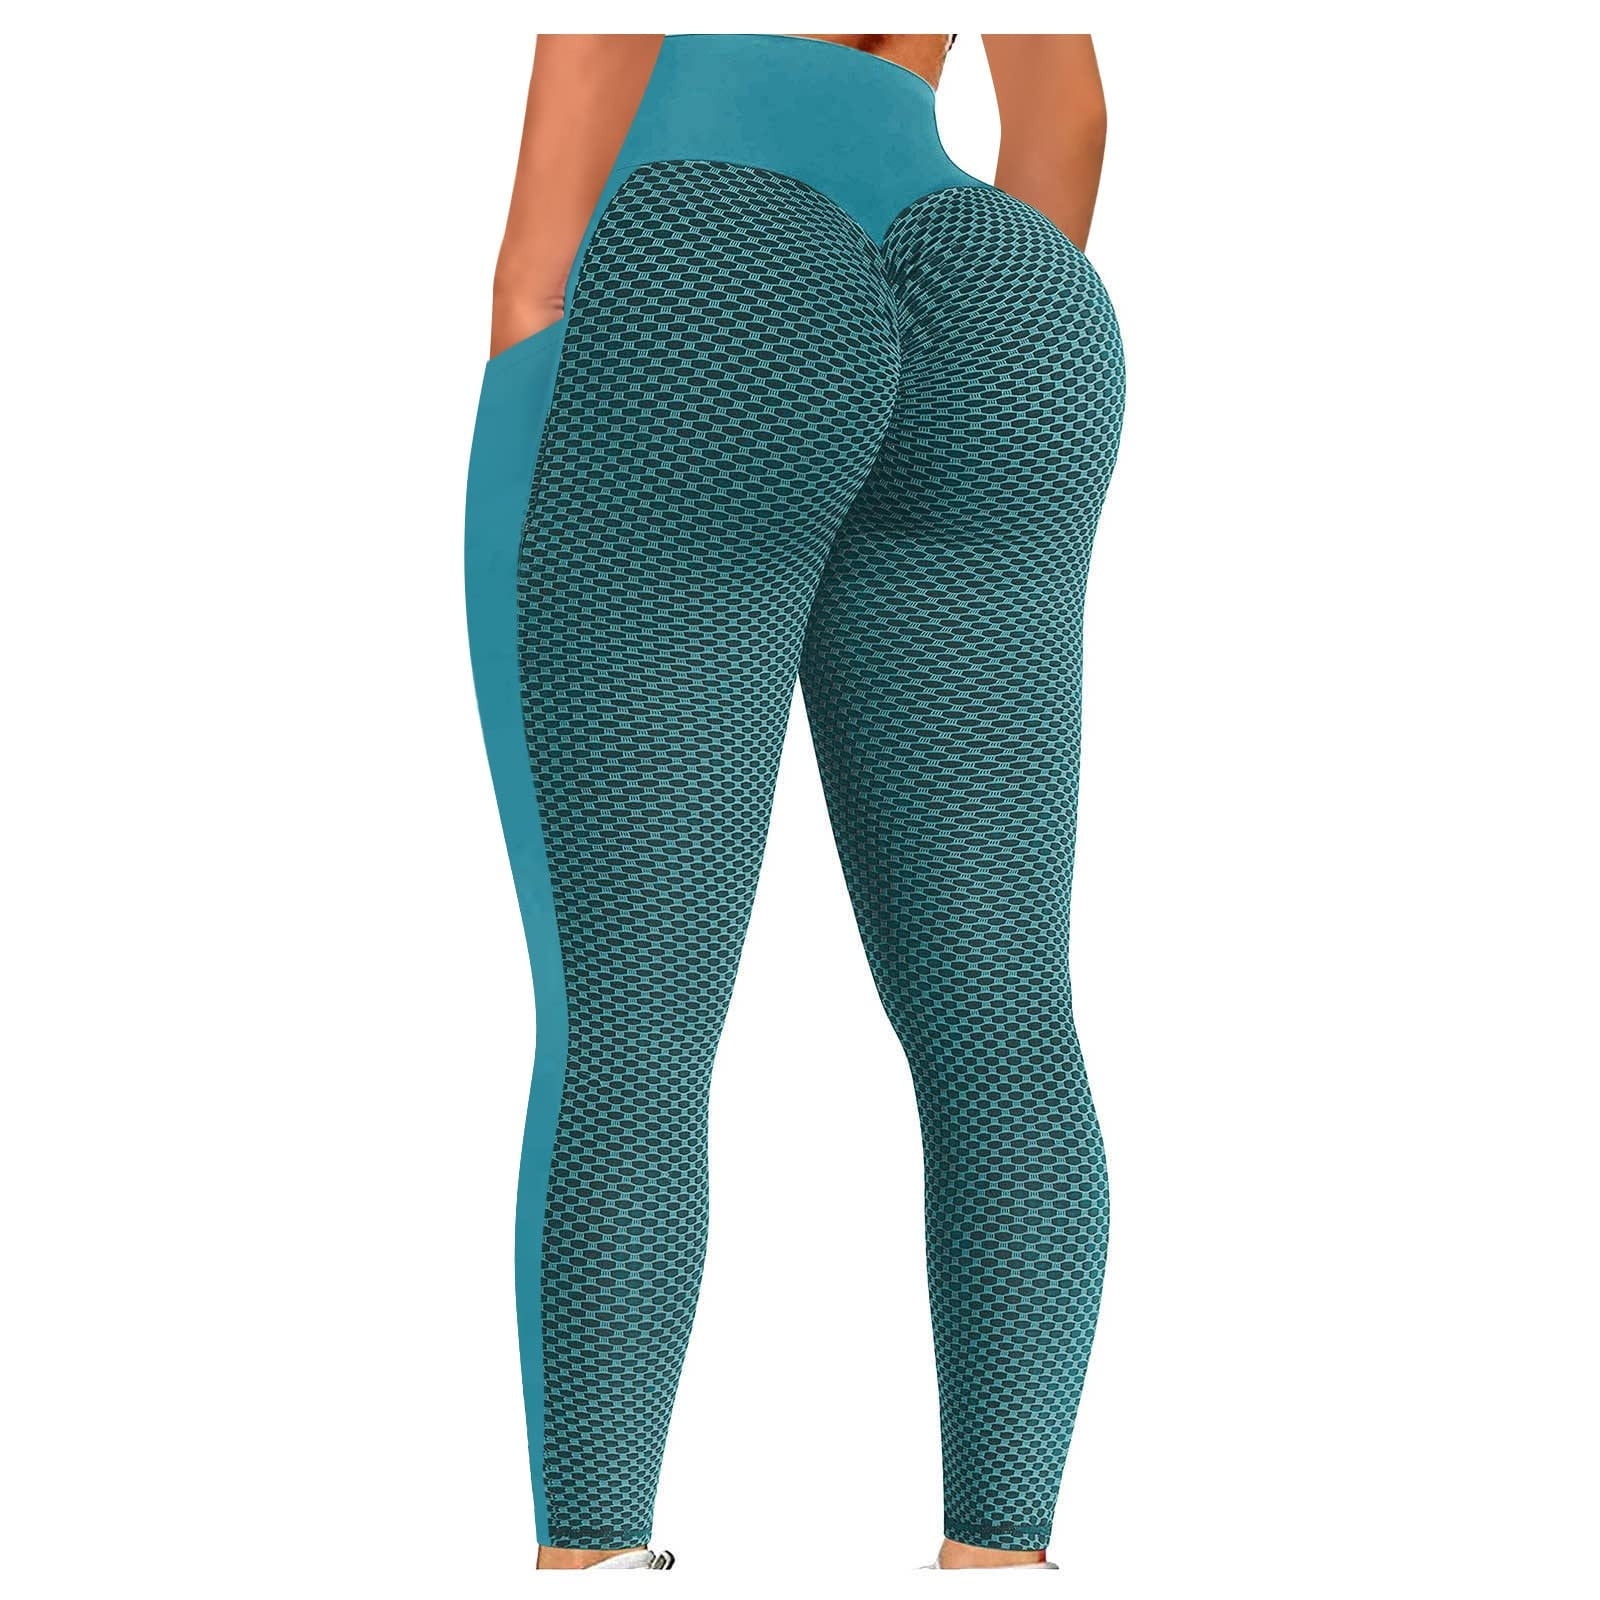 Details about   Women Casual Stright High Waist Leggings Soft Slim Yoga GYM Pant With Pocket 